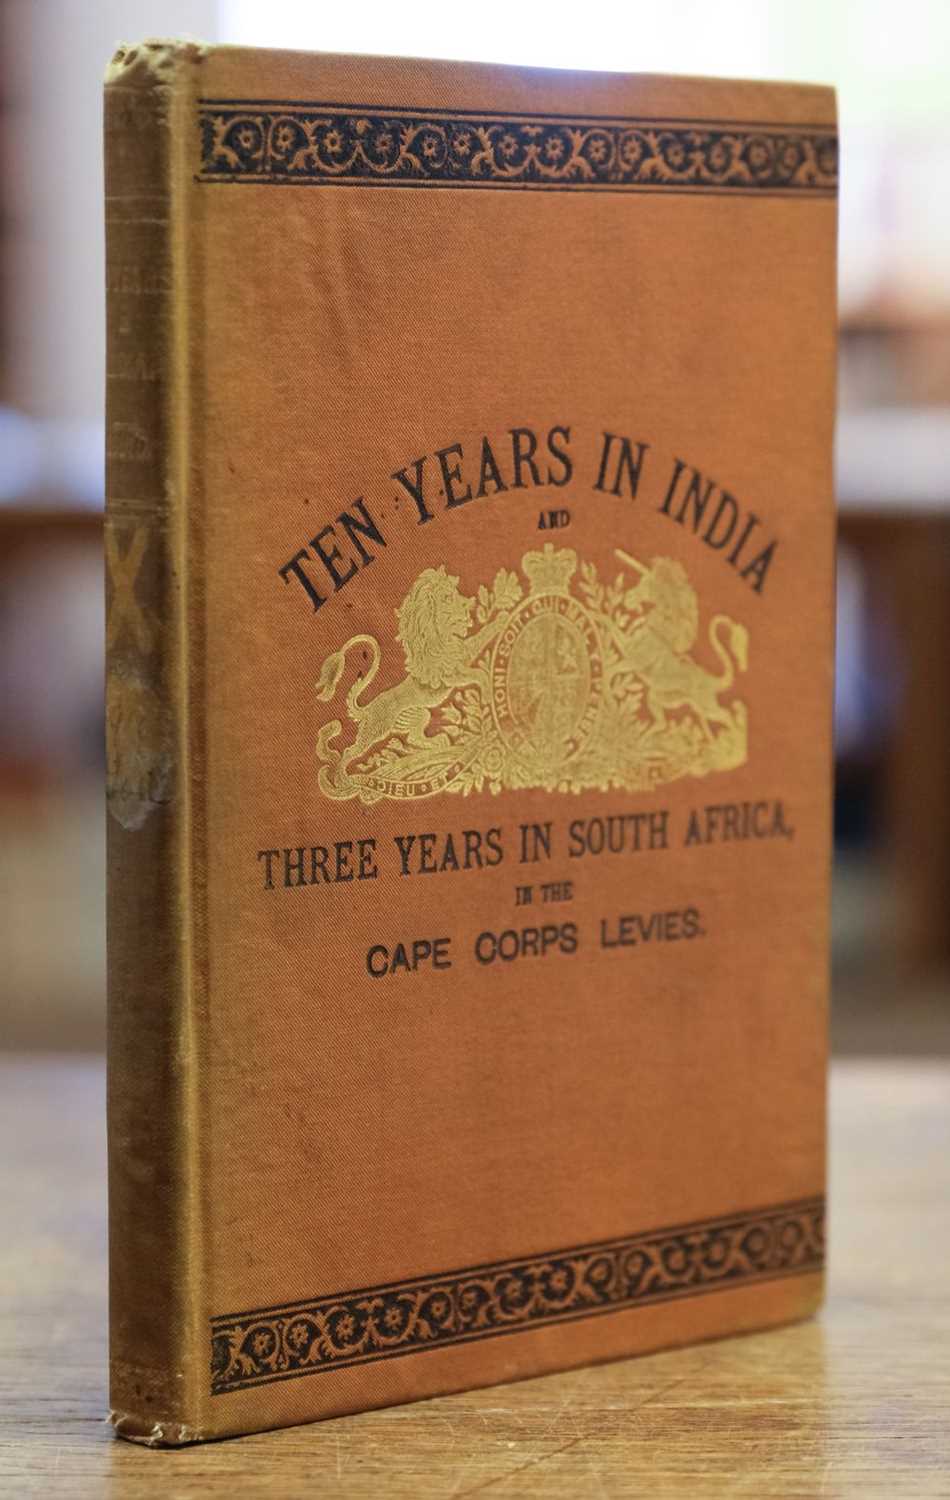 Lot 32 - Gould (W.J.D). Ten Years in India, Toronto: Rose & Company, 1880